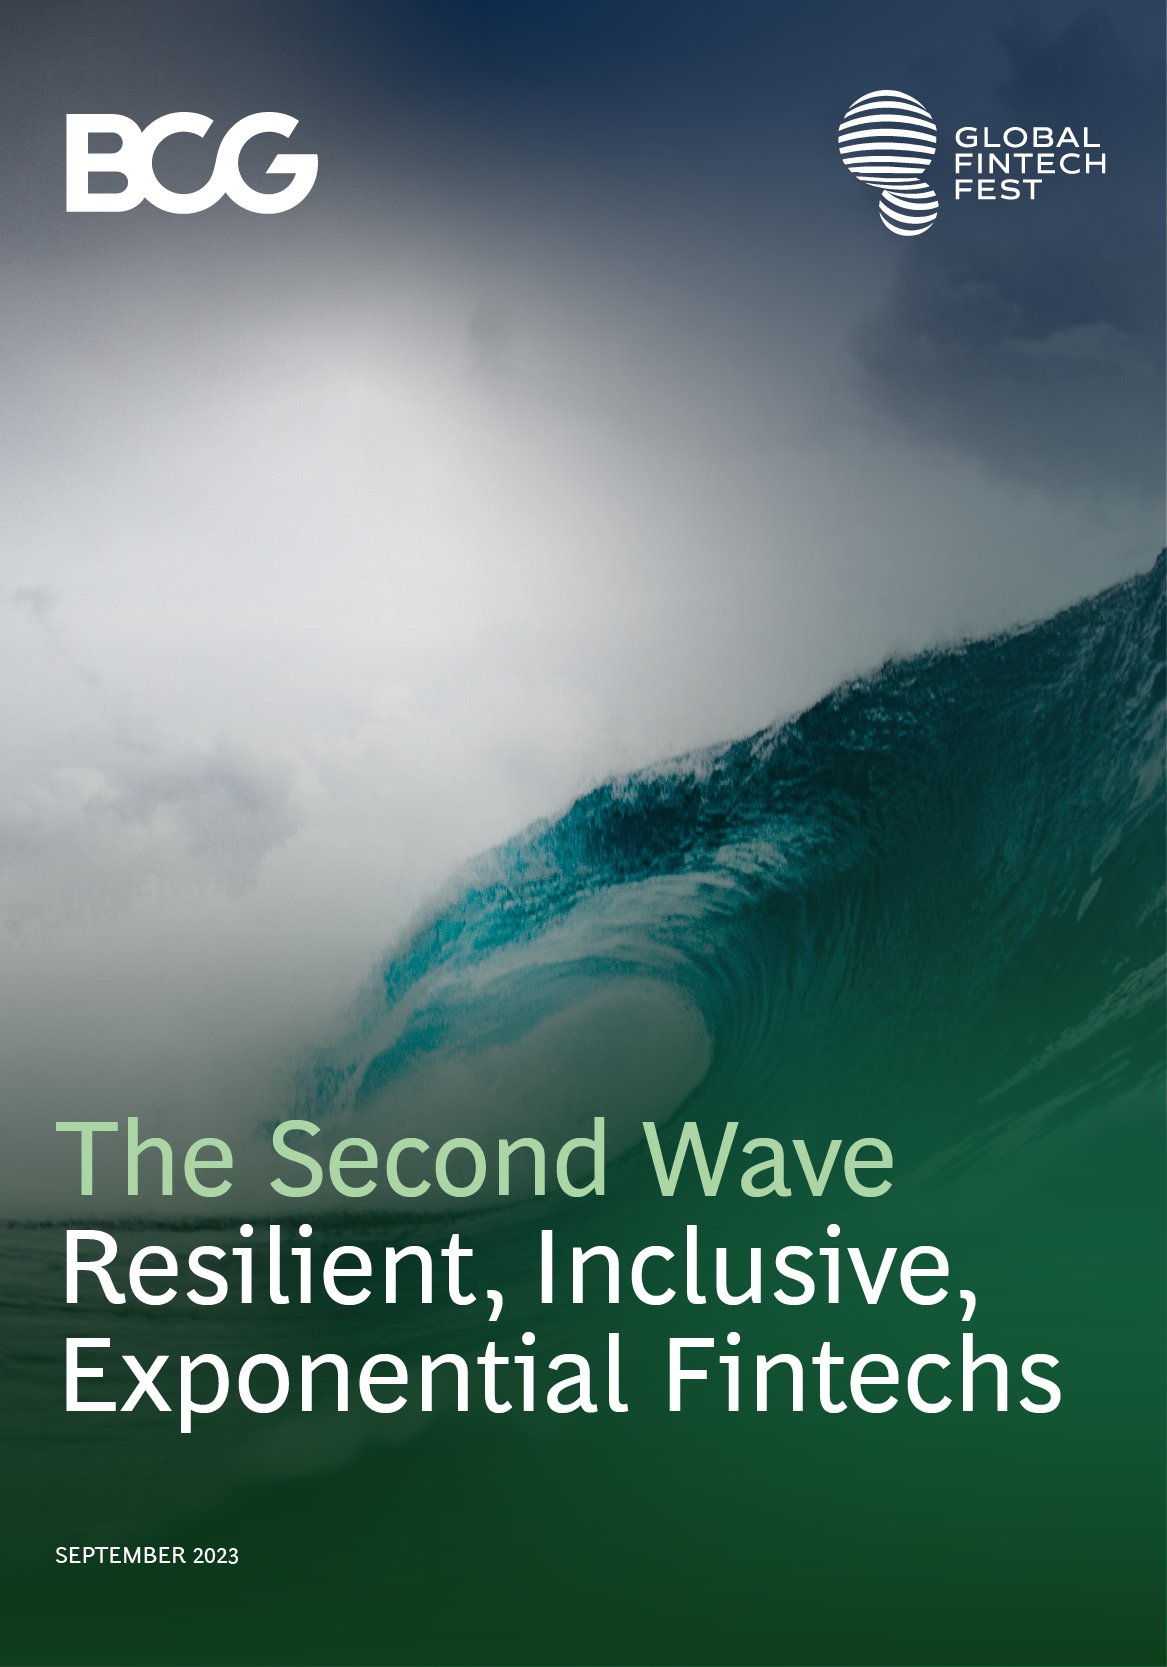 The Second Wave - Resilient, Inclusive, Exponential Fintech